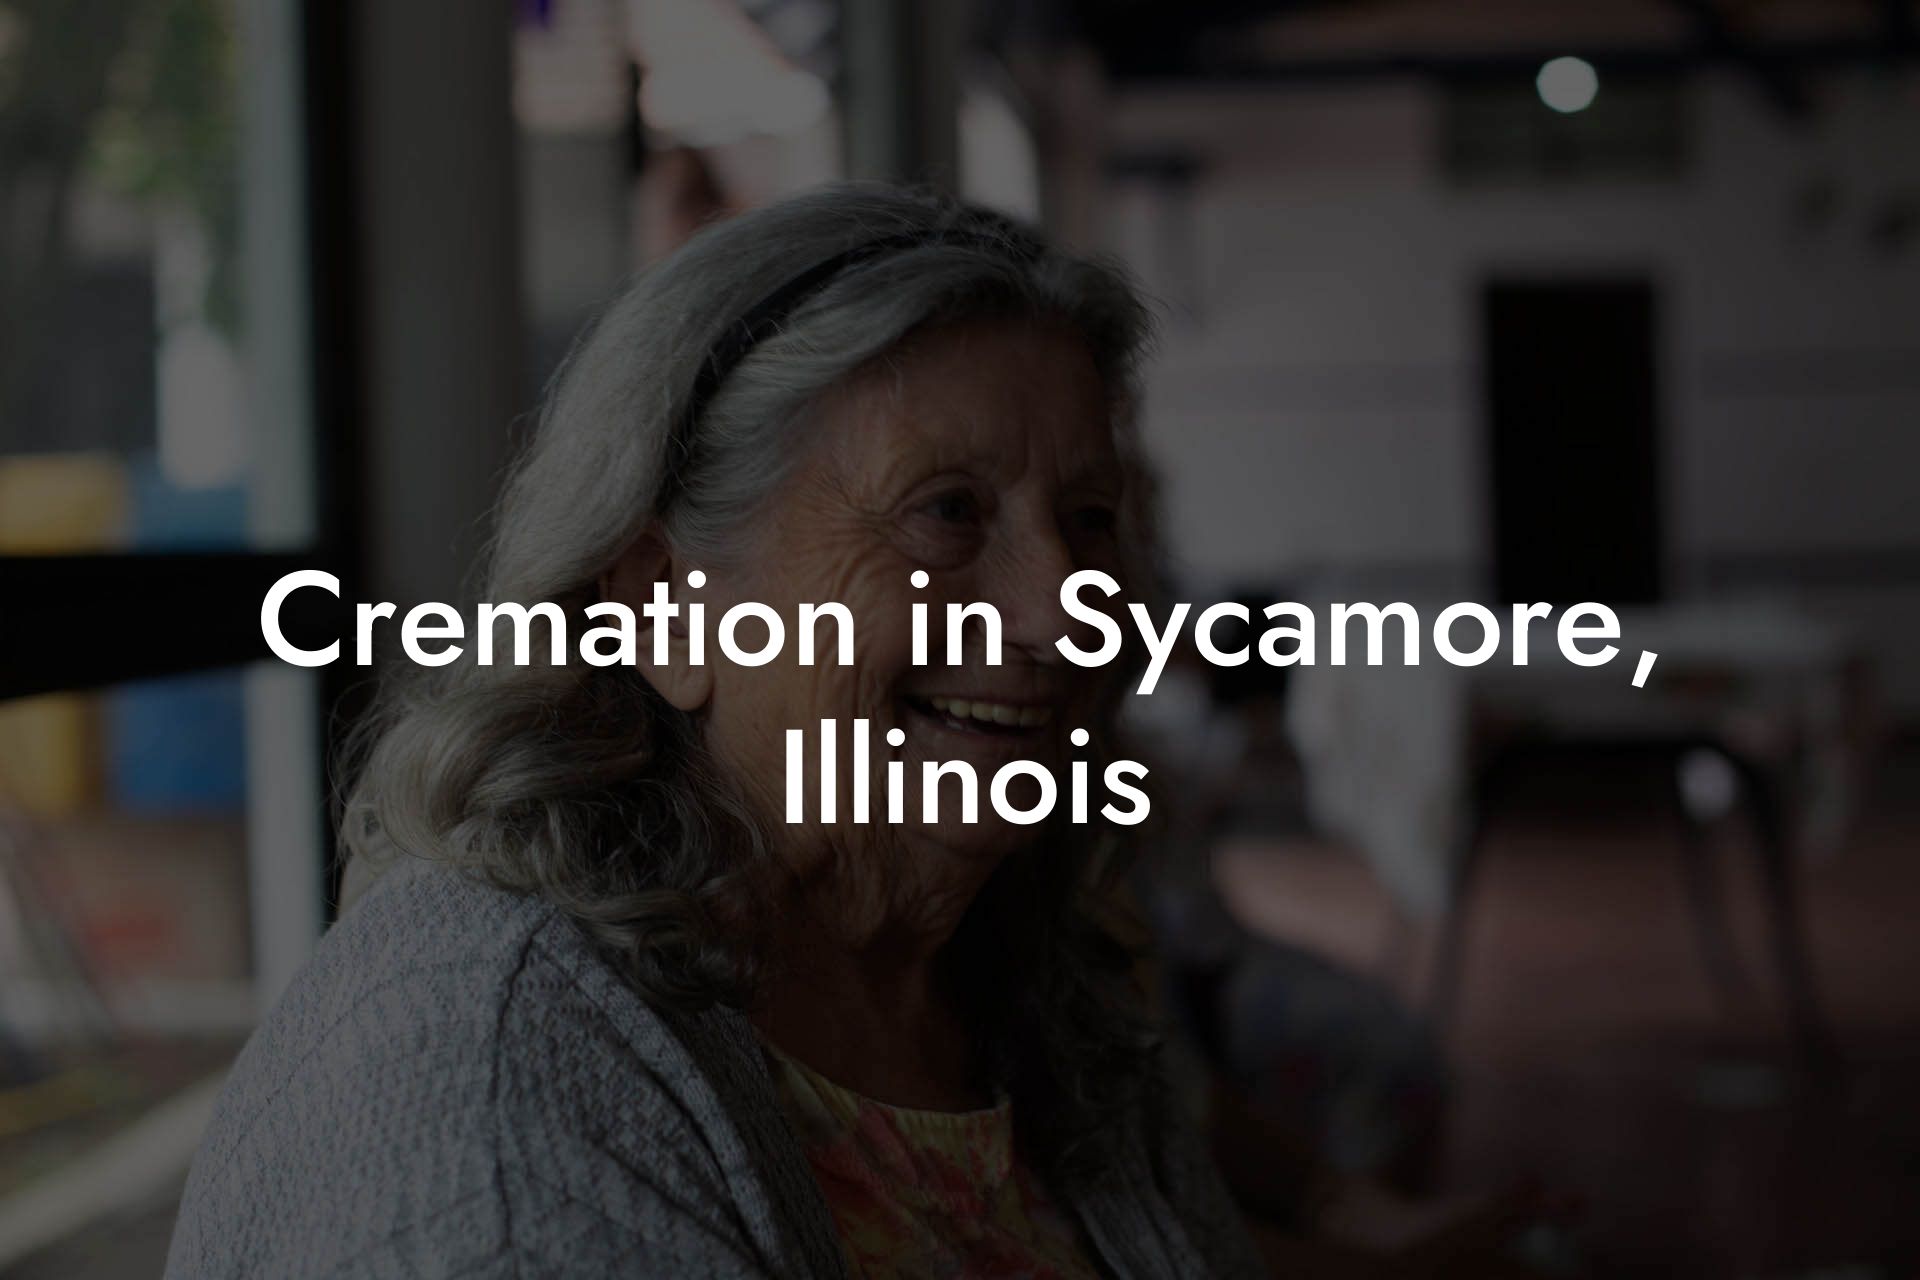 Cremation in Sycamore, Illinois